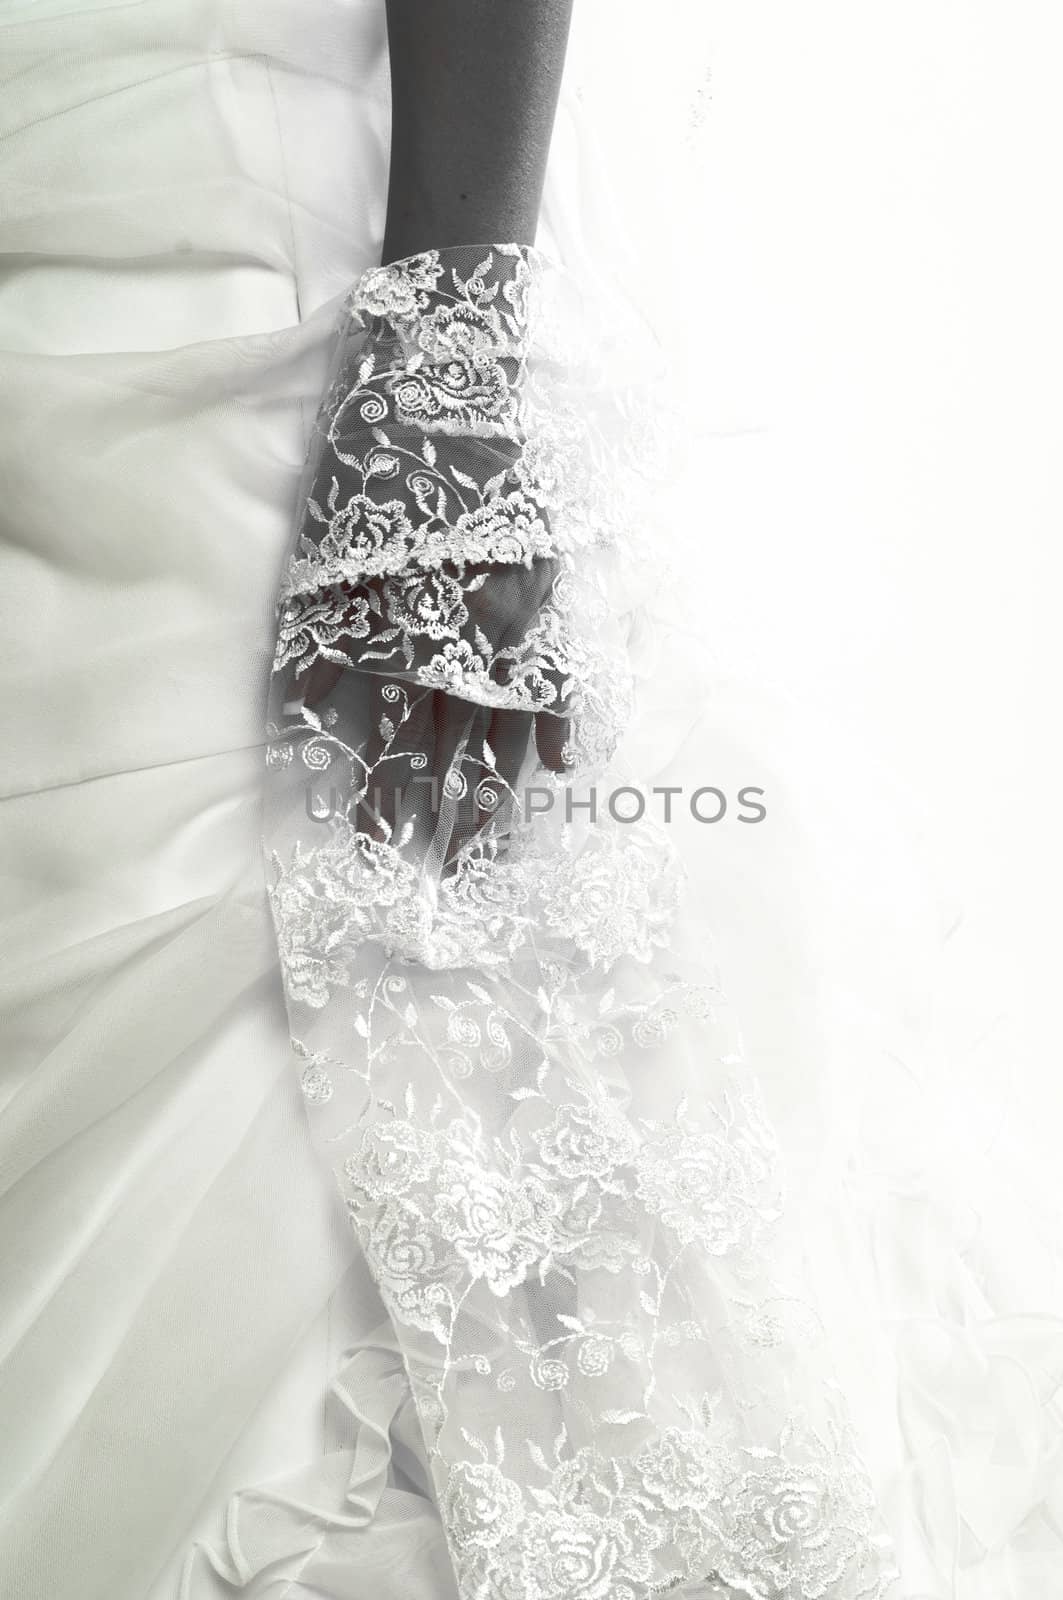 Woans hand in wedding dress by svedoliver